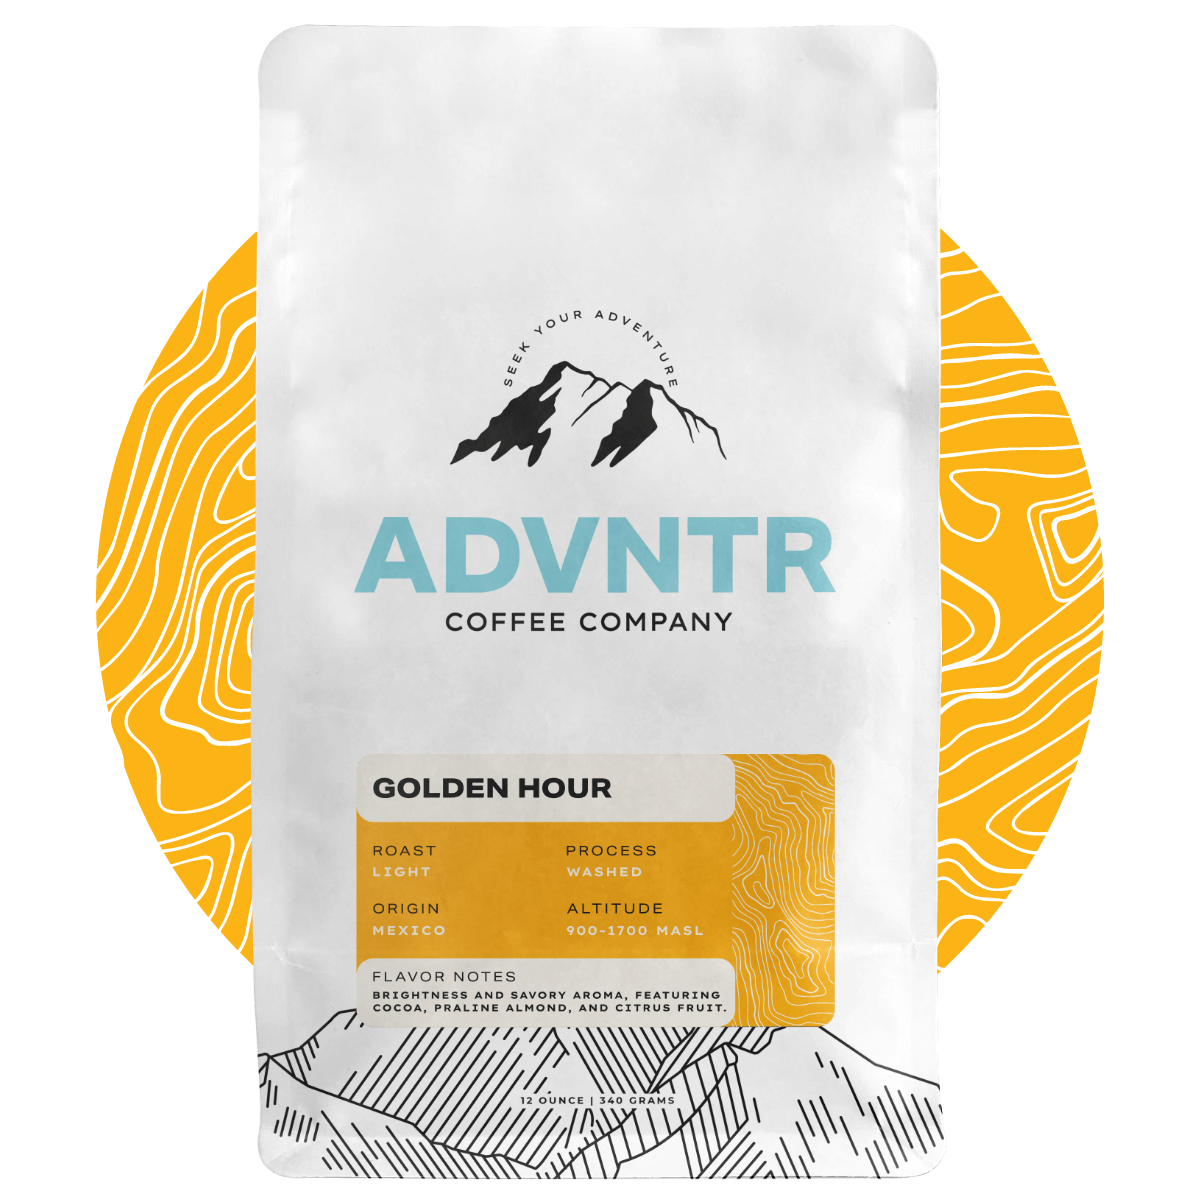 Golden Hour 12 ounce coffee bag by ADVNTR Coffee